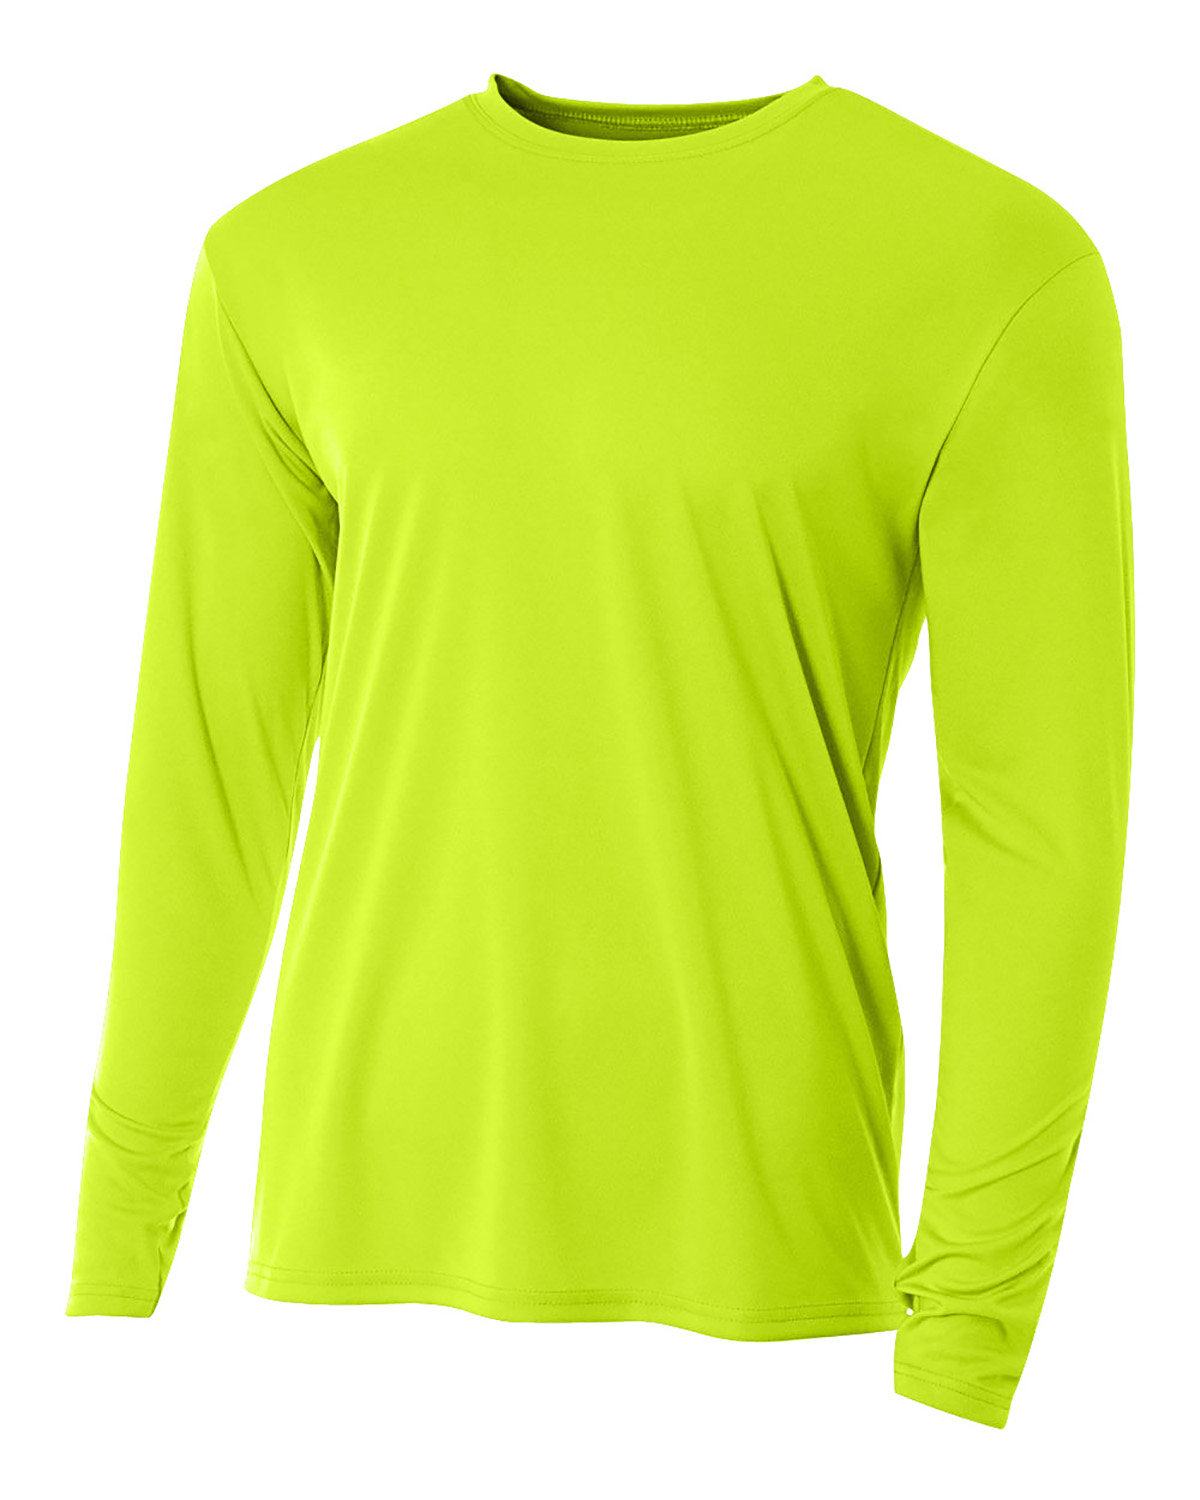 A4 Men's Cooling Performance Long Sleeve T-Shirt LIME 